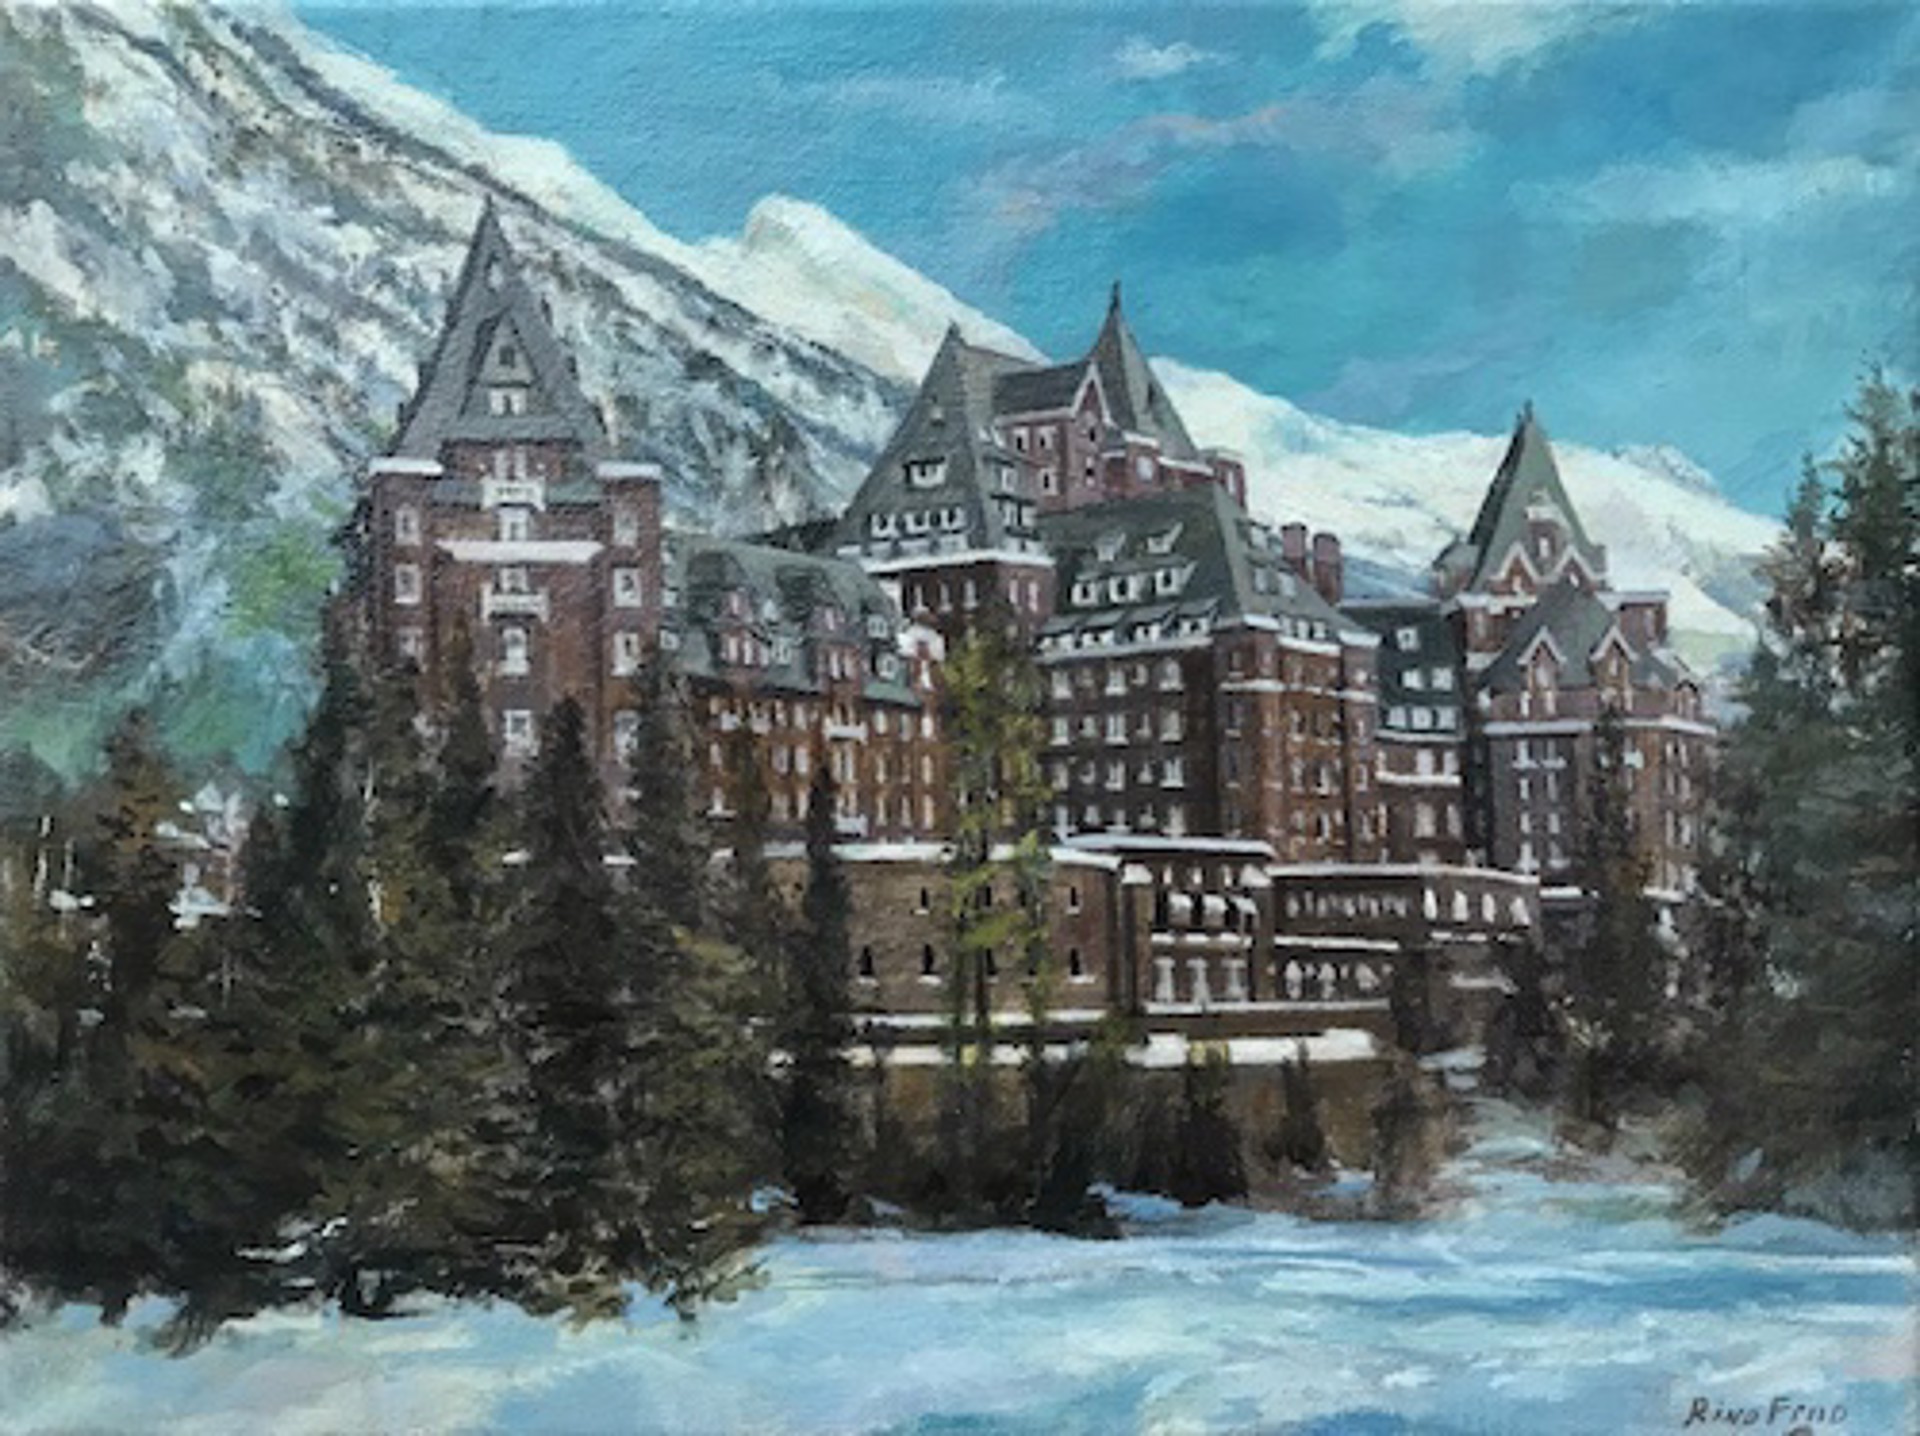 Afternoon at the Banff Springs by Rino Friio